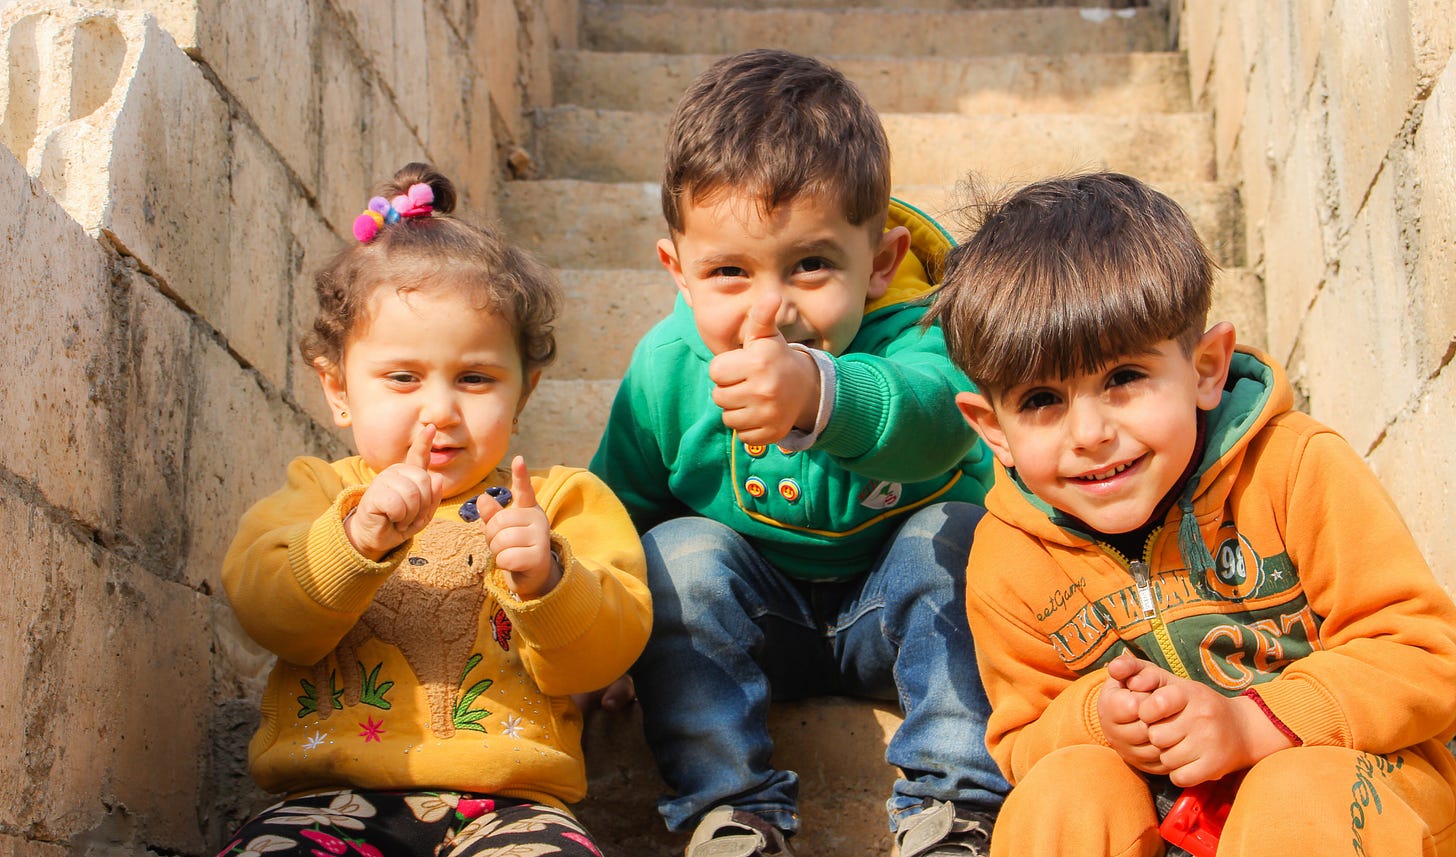 Three small children smiling while sitting on steps.